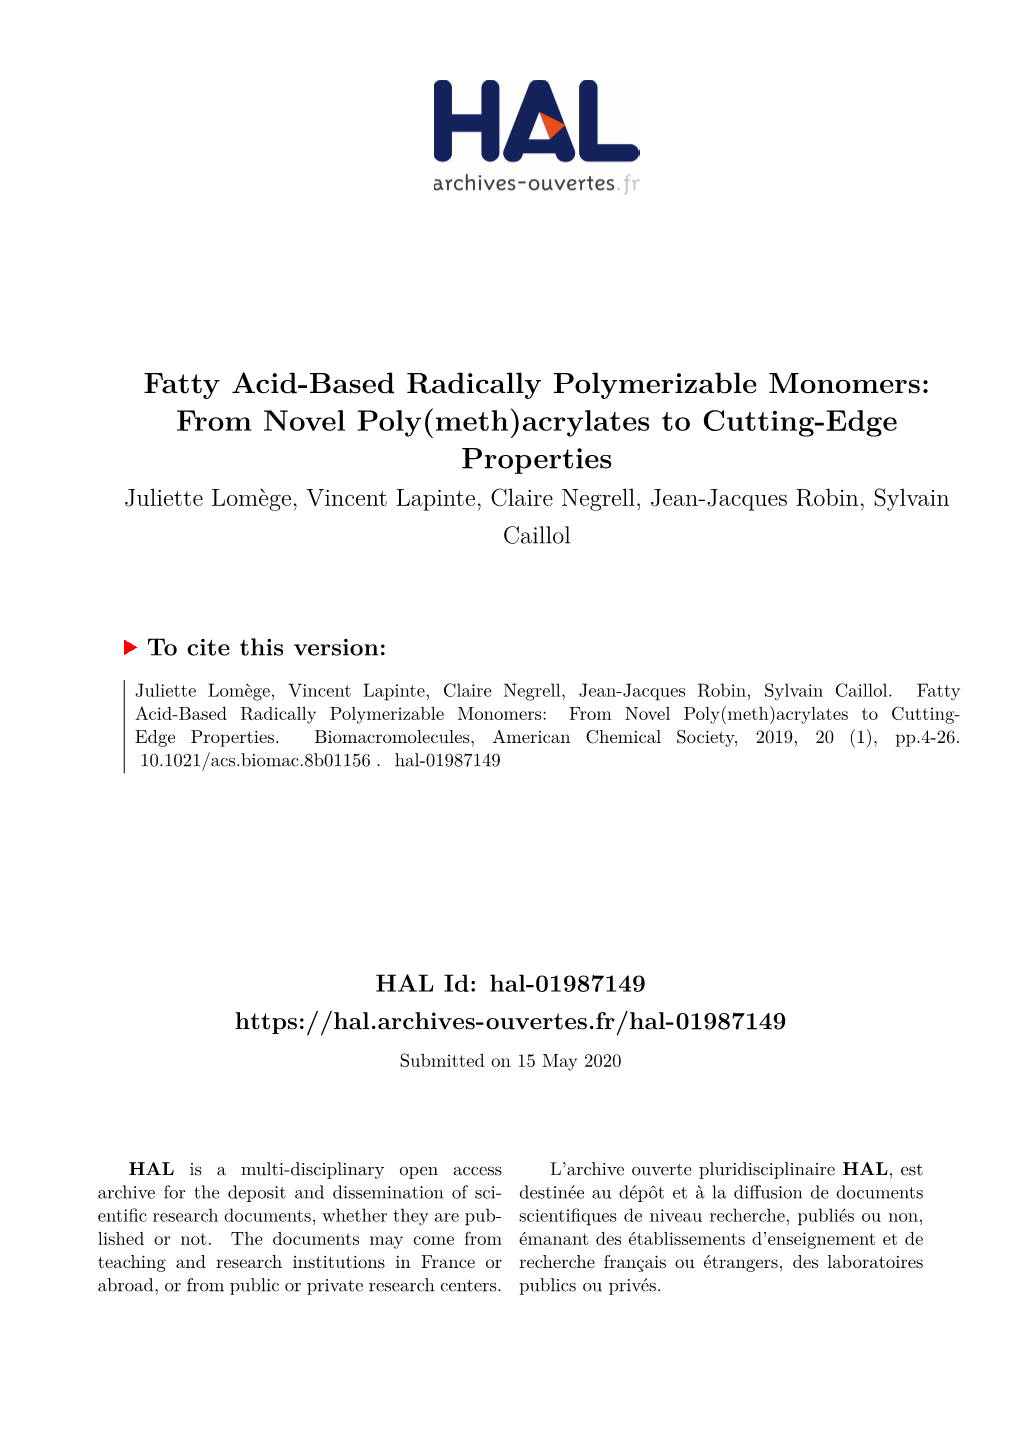 Fatty Acid-Based Radically Polymerizable Monomers: From